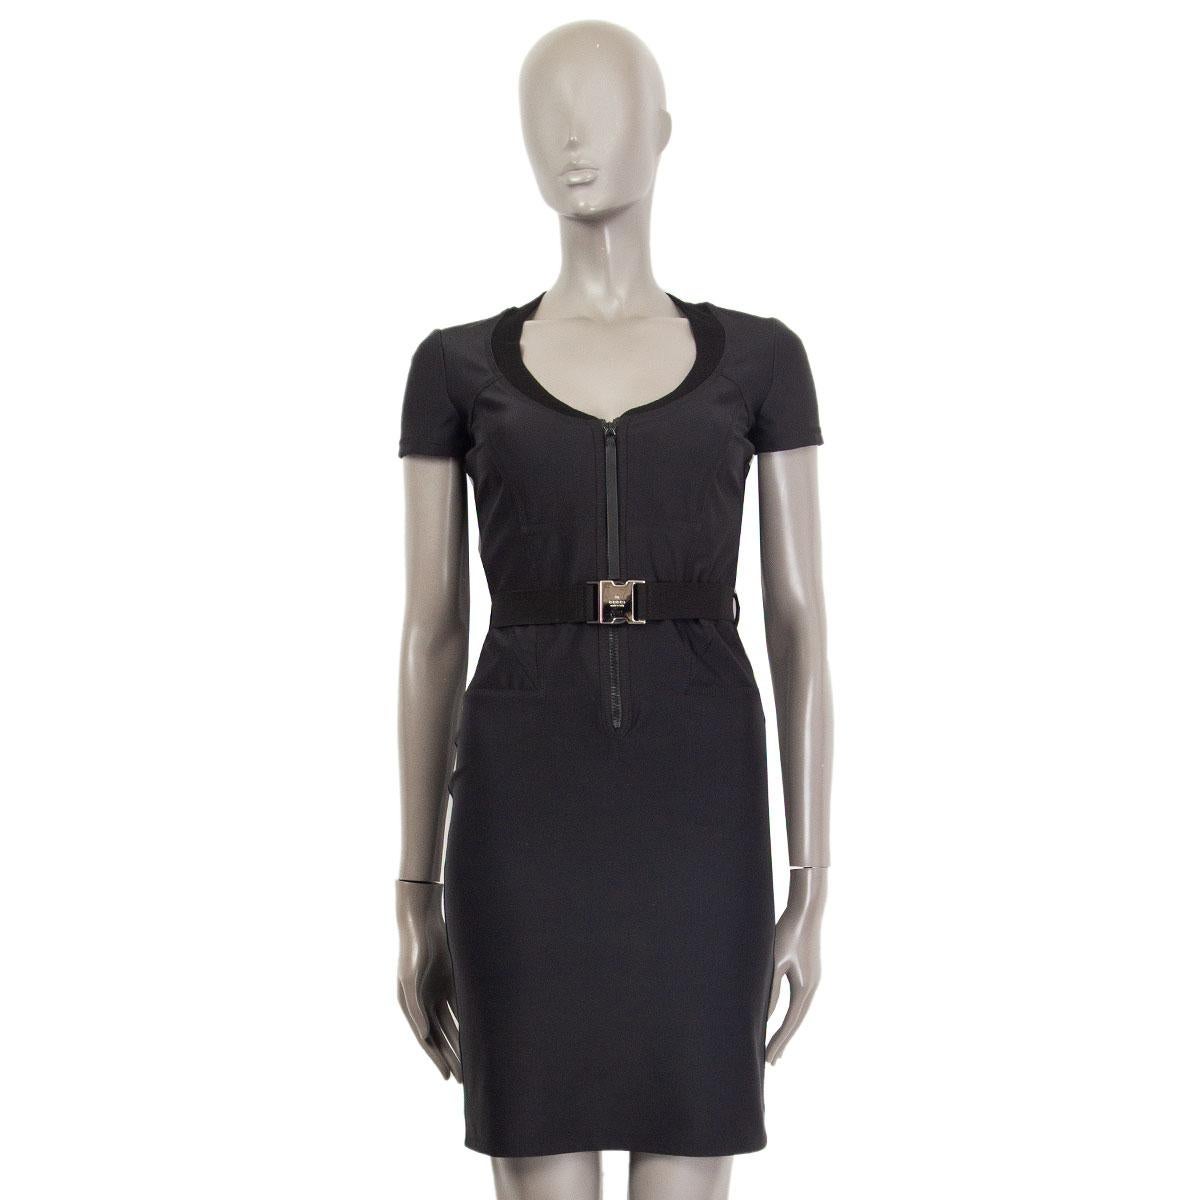 100% authentic Gucci neoprene sheath dress in black missing tag (probably viscose). With a close fit, detailed seams, ribbed neckline, short sleeves and a waist-belt. Closes with a zipper in the front. Has been worn and is in excellent